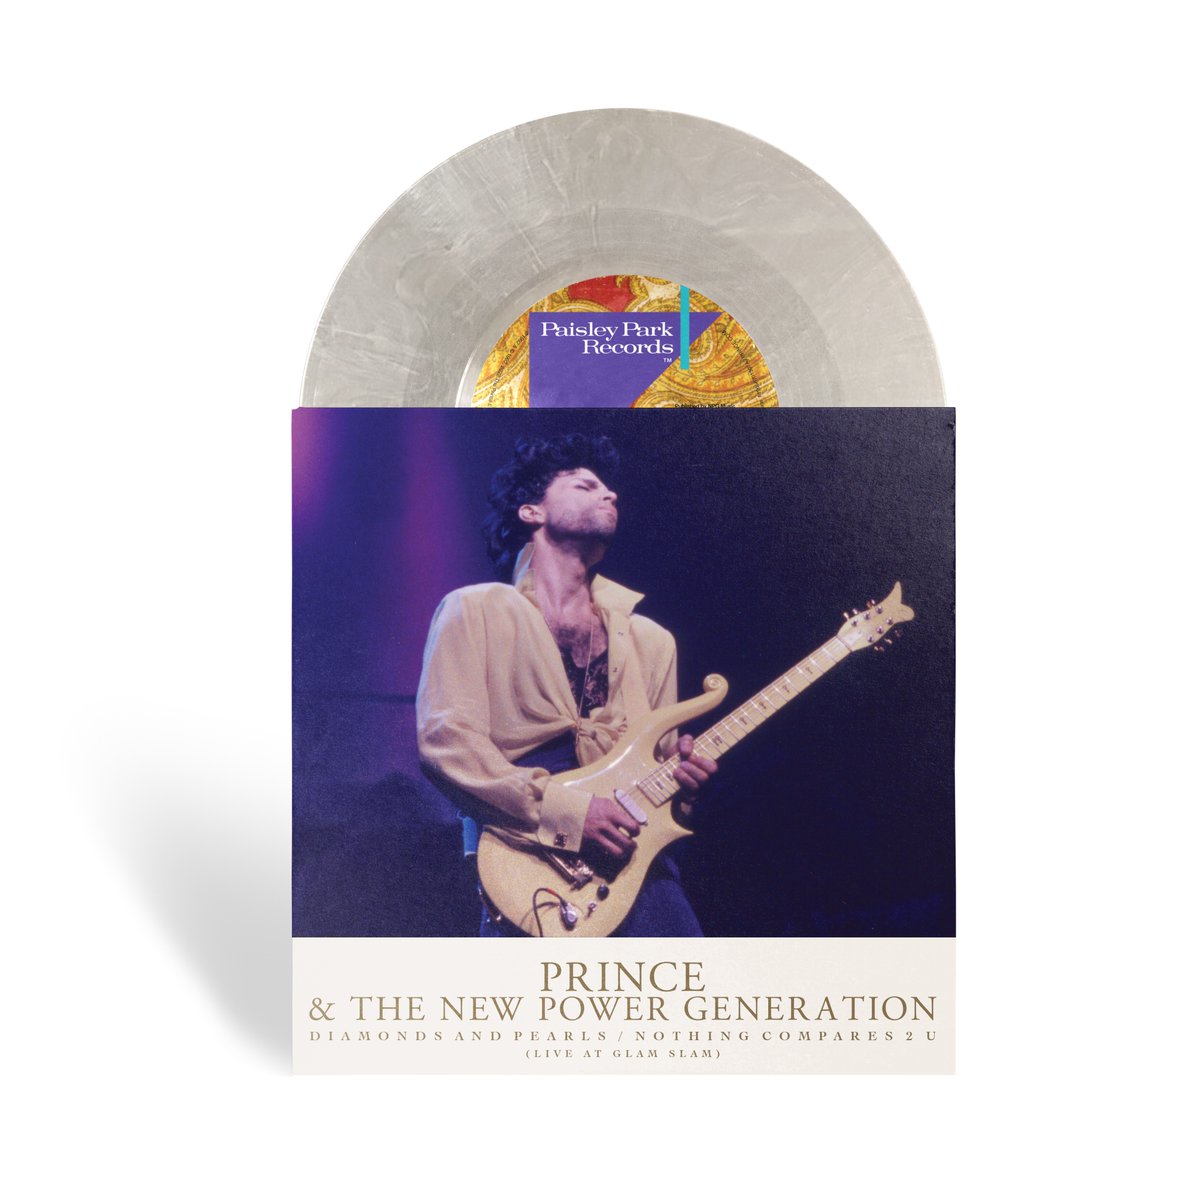 Kør væk kølig Kompliment Prince on Twitter: "Additionally, all GA and VIP guests at  #PRINCECELEBRATION2022 will receive a special limited-run, numbered 7" vinyl  single with live recordings of Prince and the NPG performing "Diamonds and  Pearls"